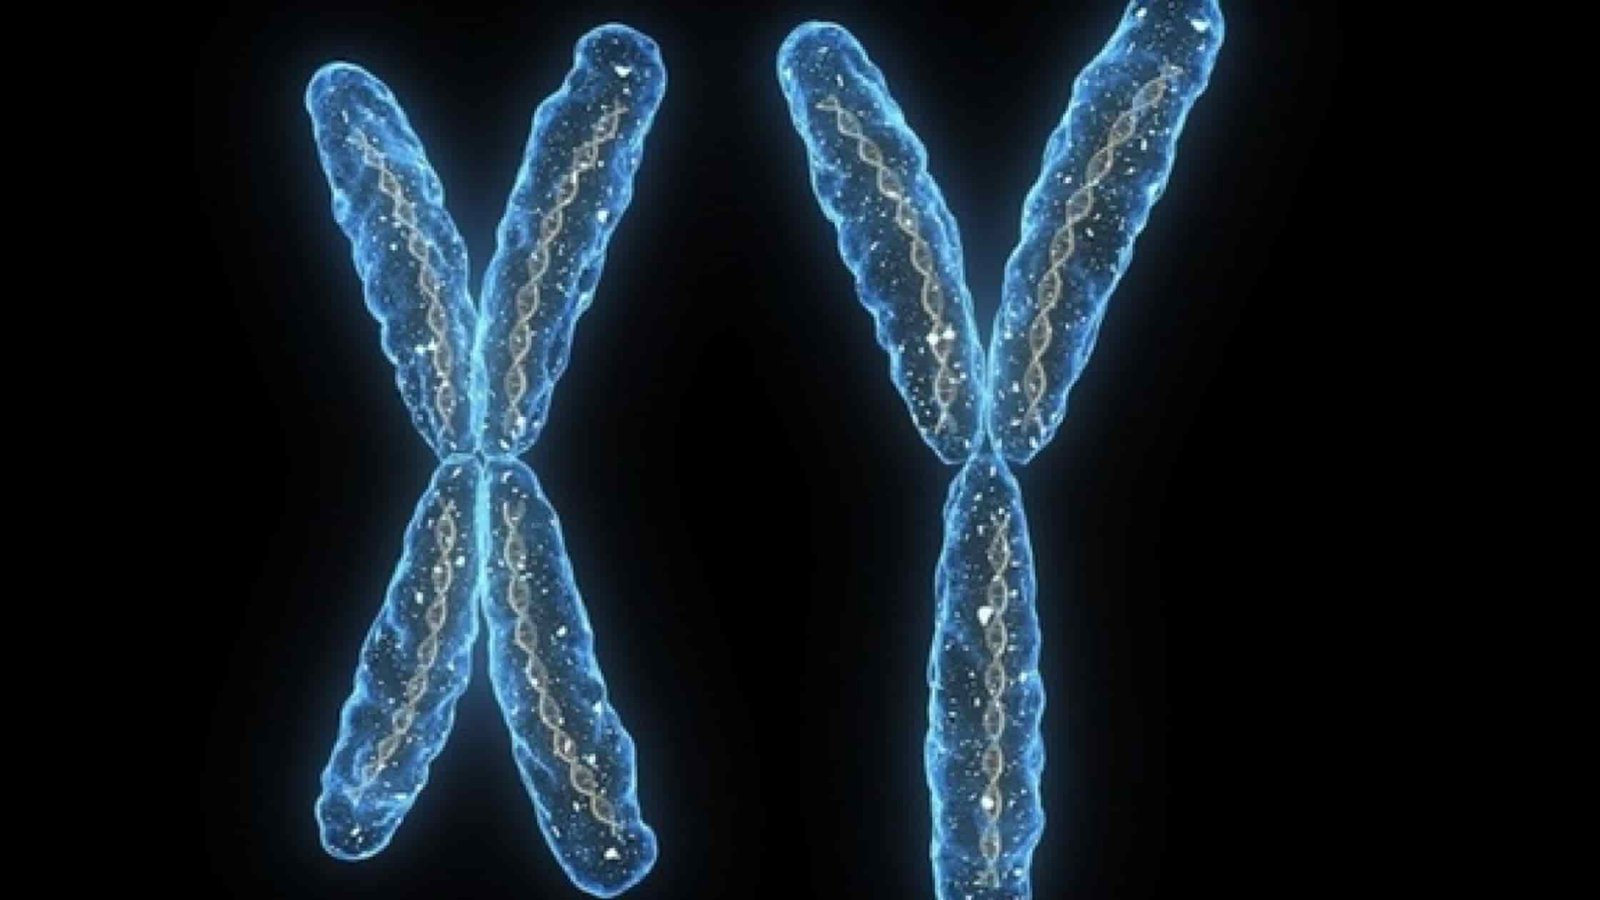 The Y chromosome that makes human male or not is disappearing - Expert